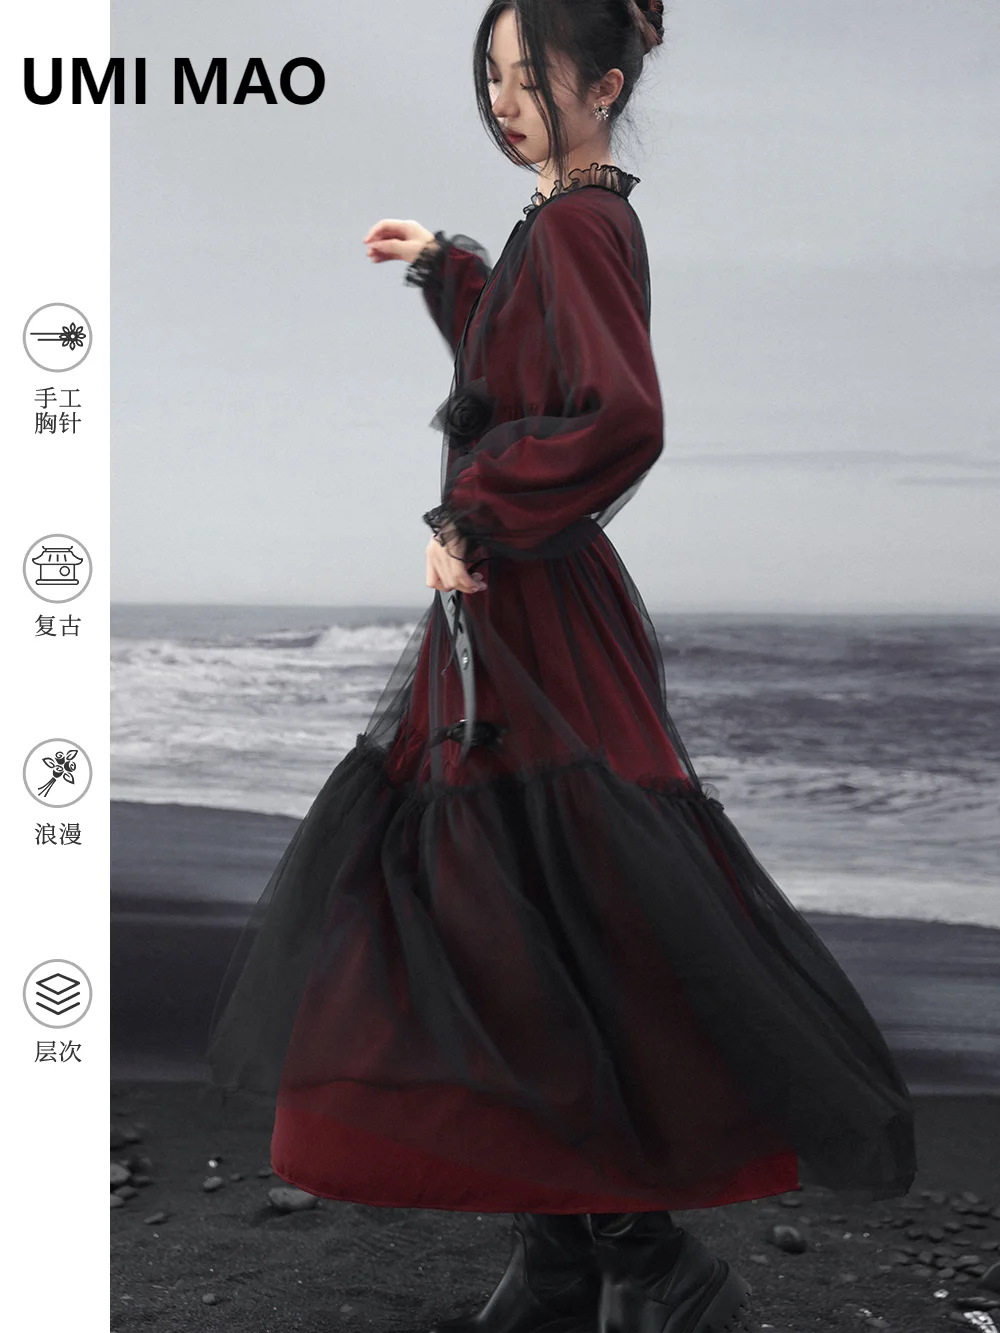 

UMI MAO Dark Contrast Dress Spring Gothic Style Big Swing Heavy Industry Perspective Mesh Loose Shirt Dress Femme Y2K